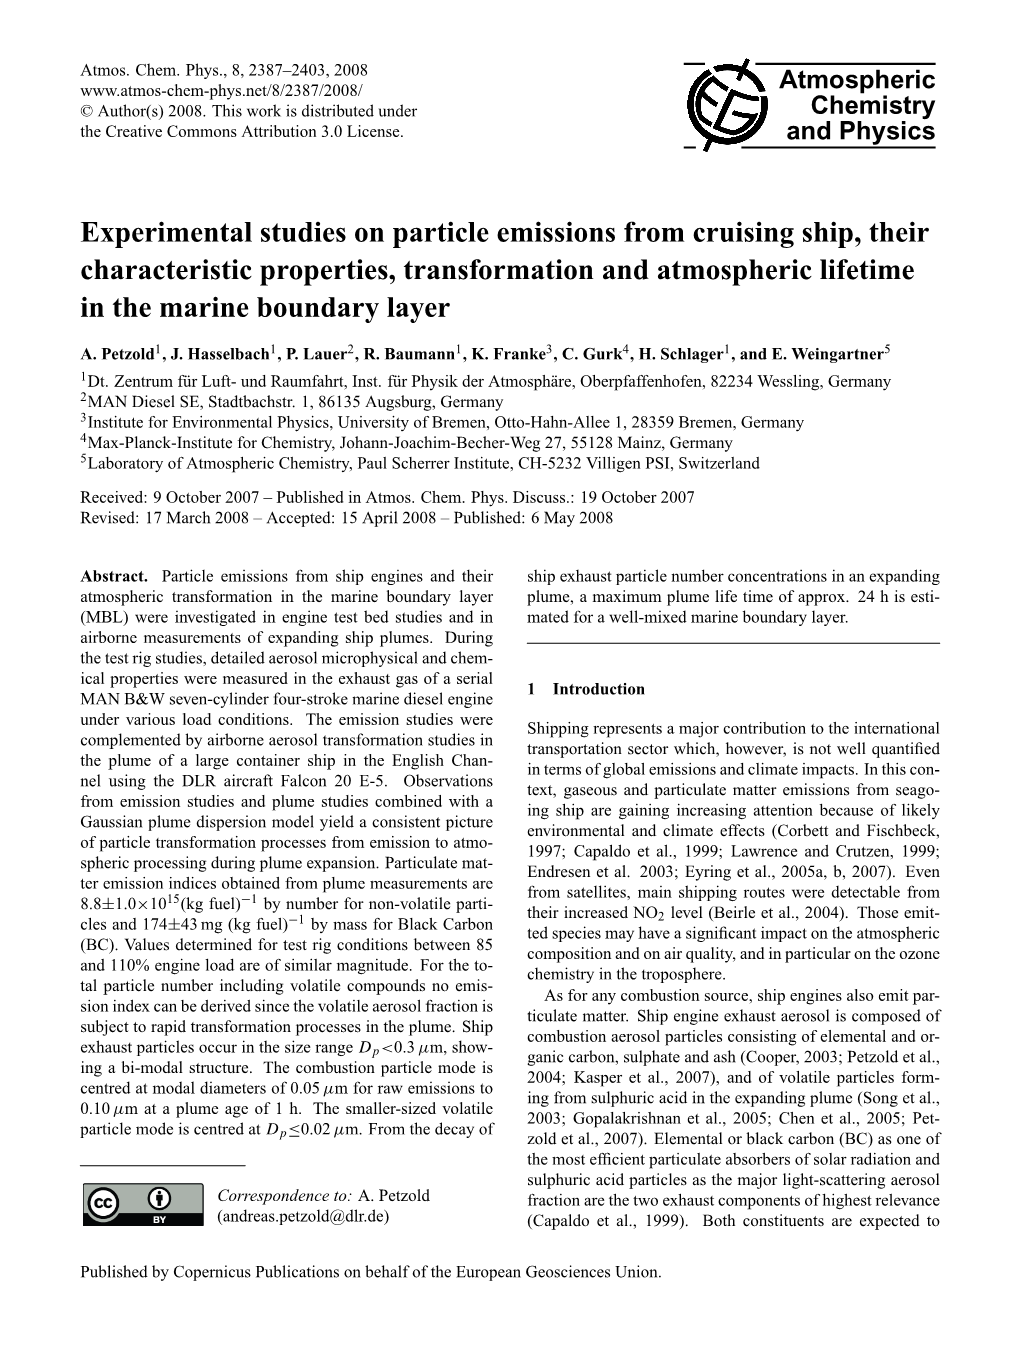 Experimental Studies on Particle Emissions from Cruising Ship, Their Characteristic Properties, Transformation and Atmospheric Lifetime in the Marine Boundary Layer